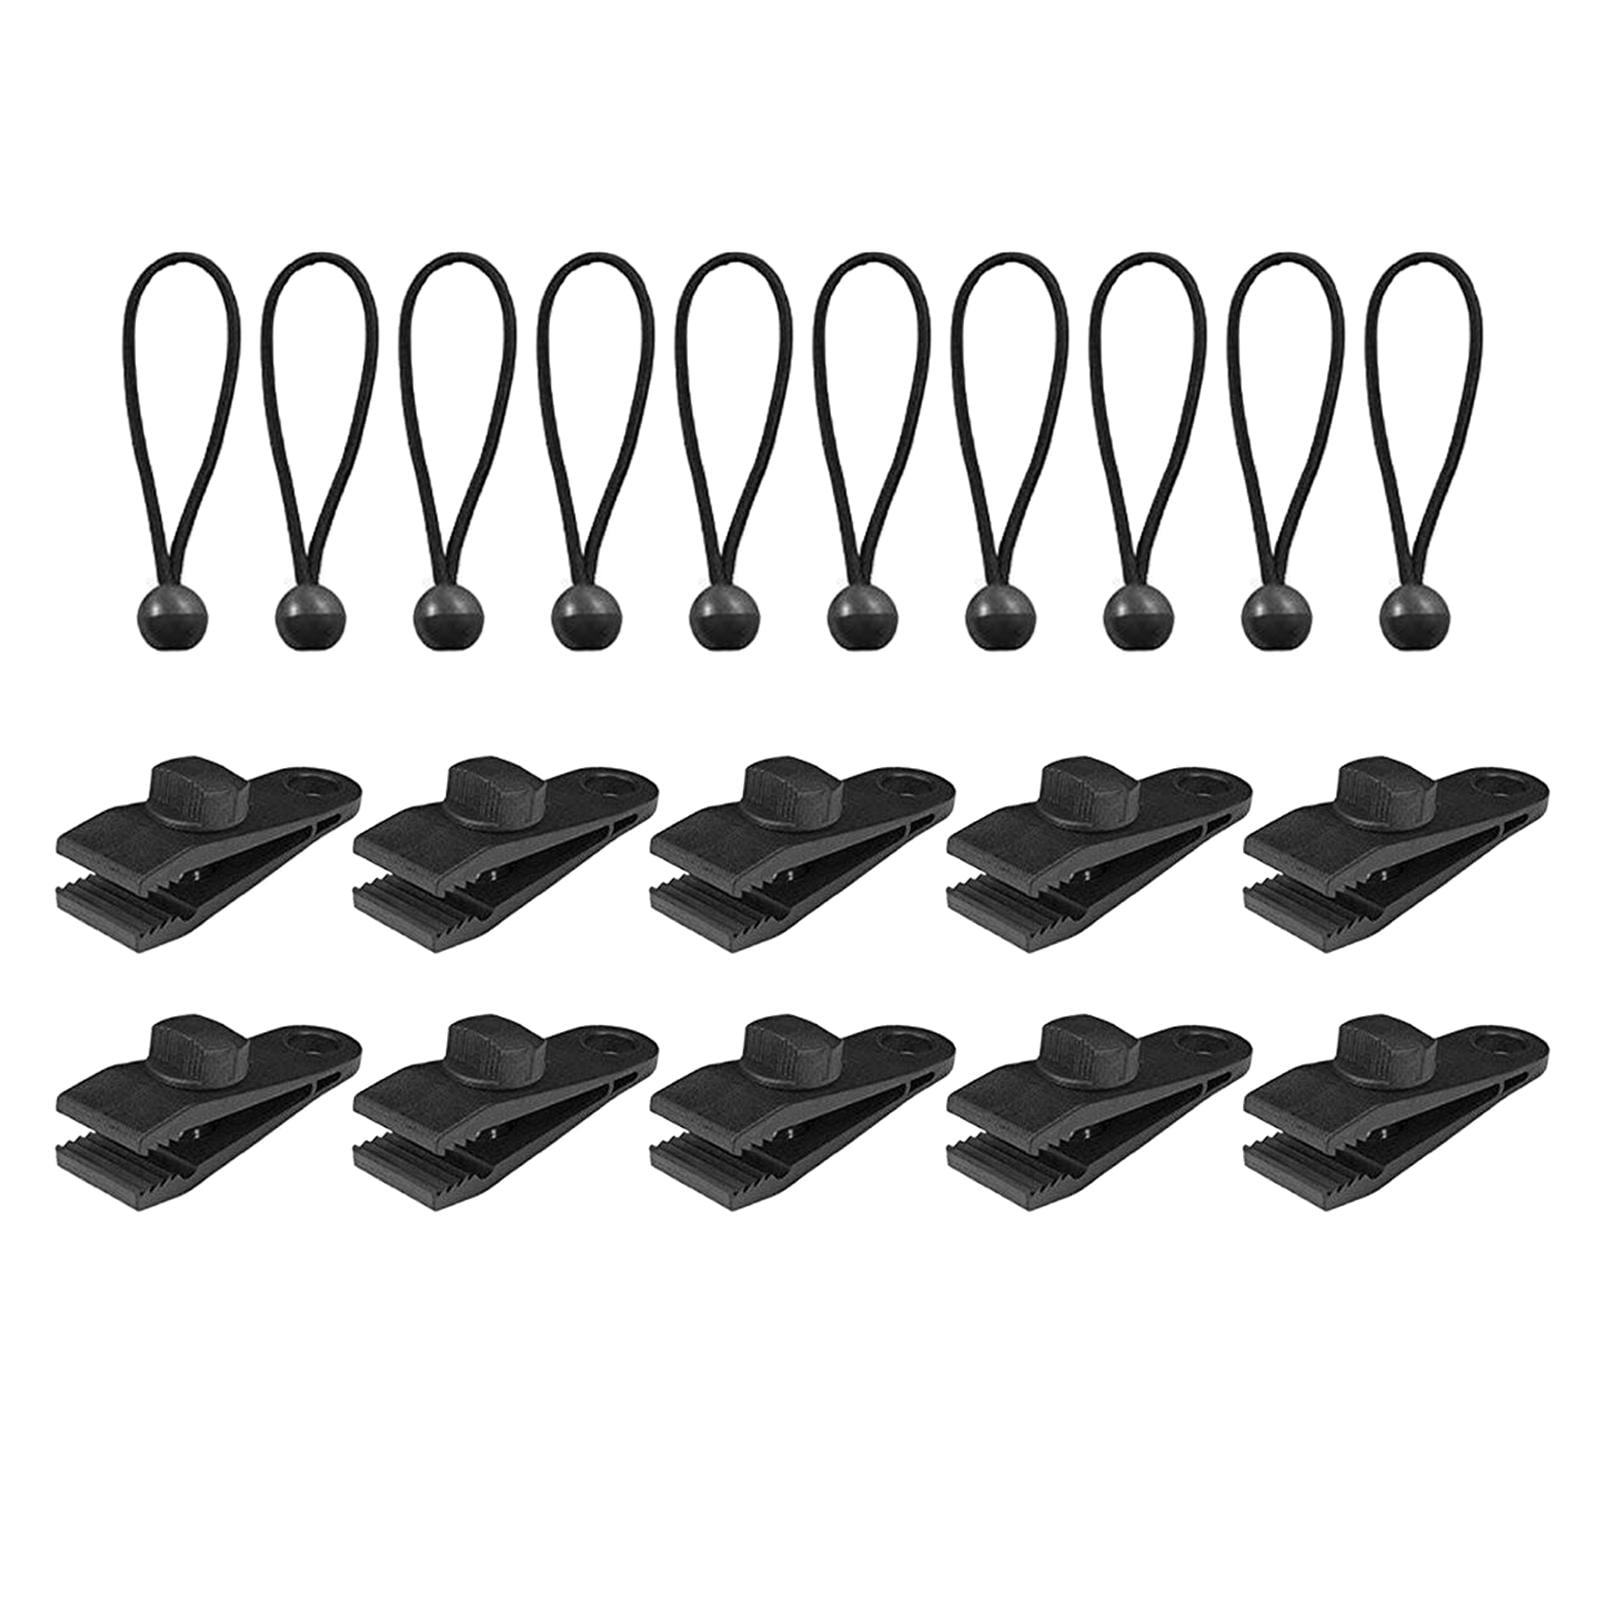 12 Pack Awning Clamp Set Tarp Tie Downs Clips Snap Hangers Emergency Survival 